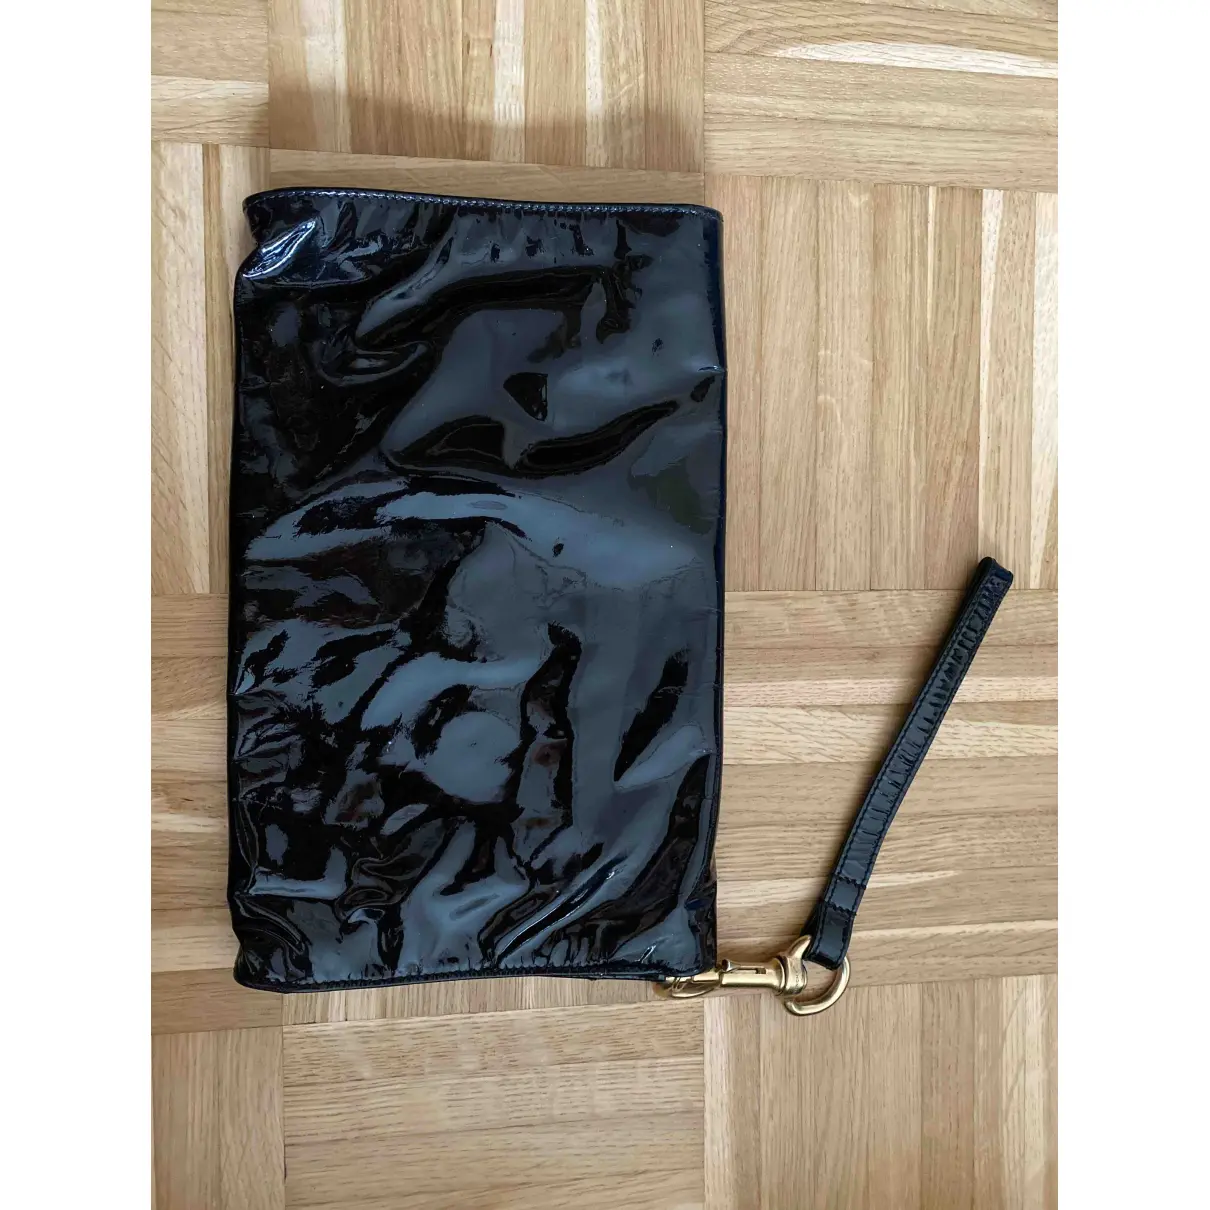 Buy Givenchy Patent leather clutch bag online